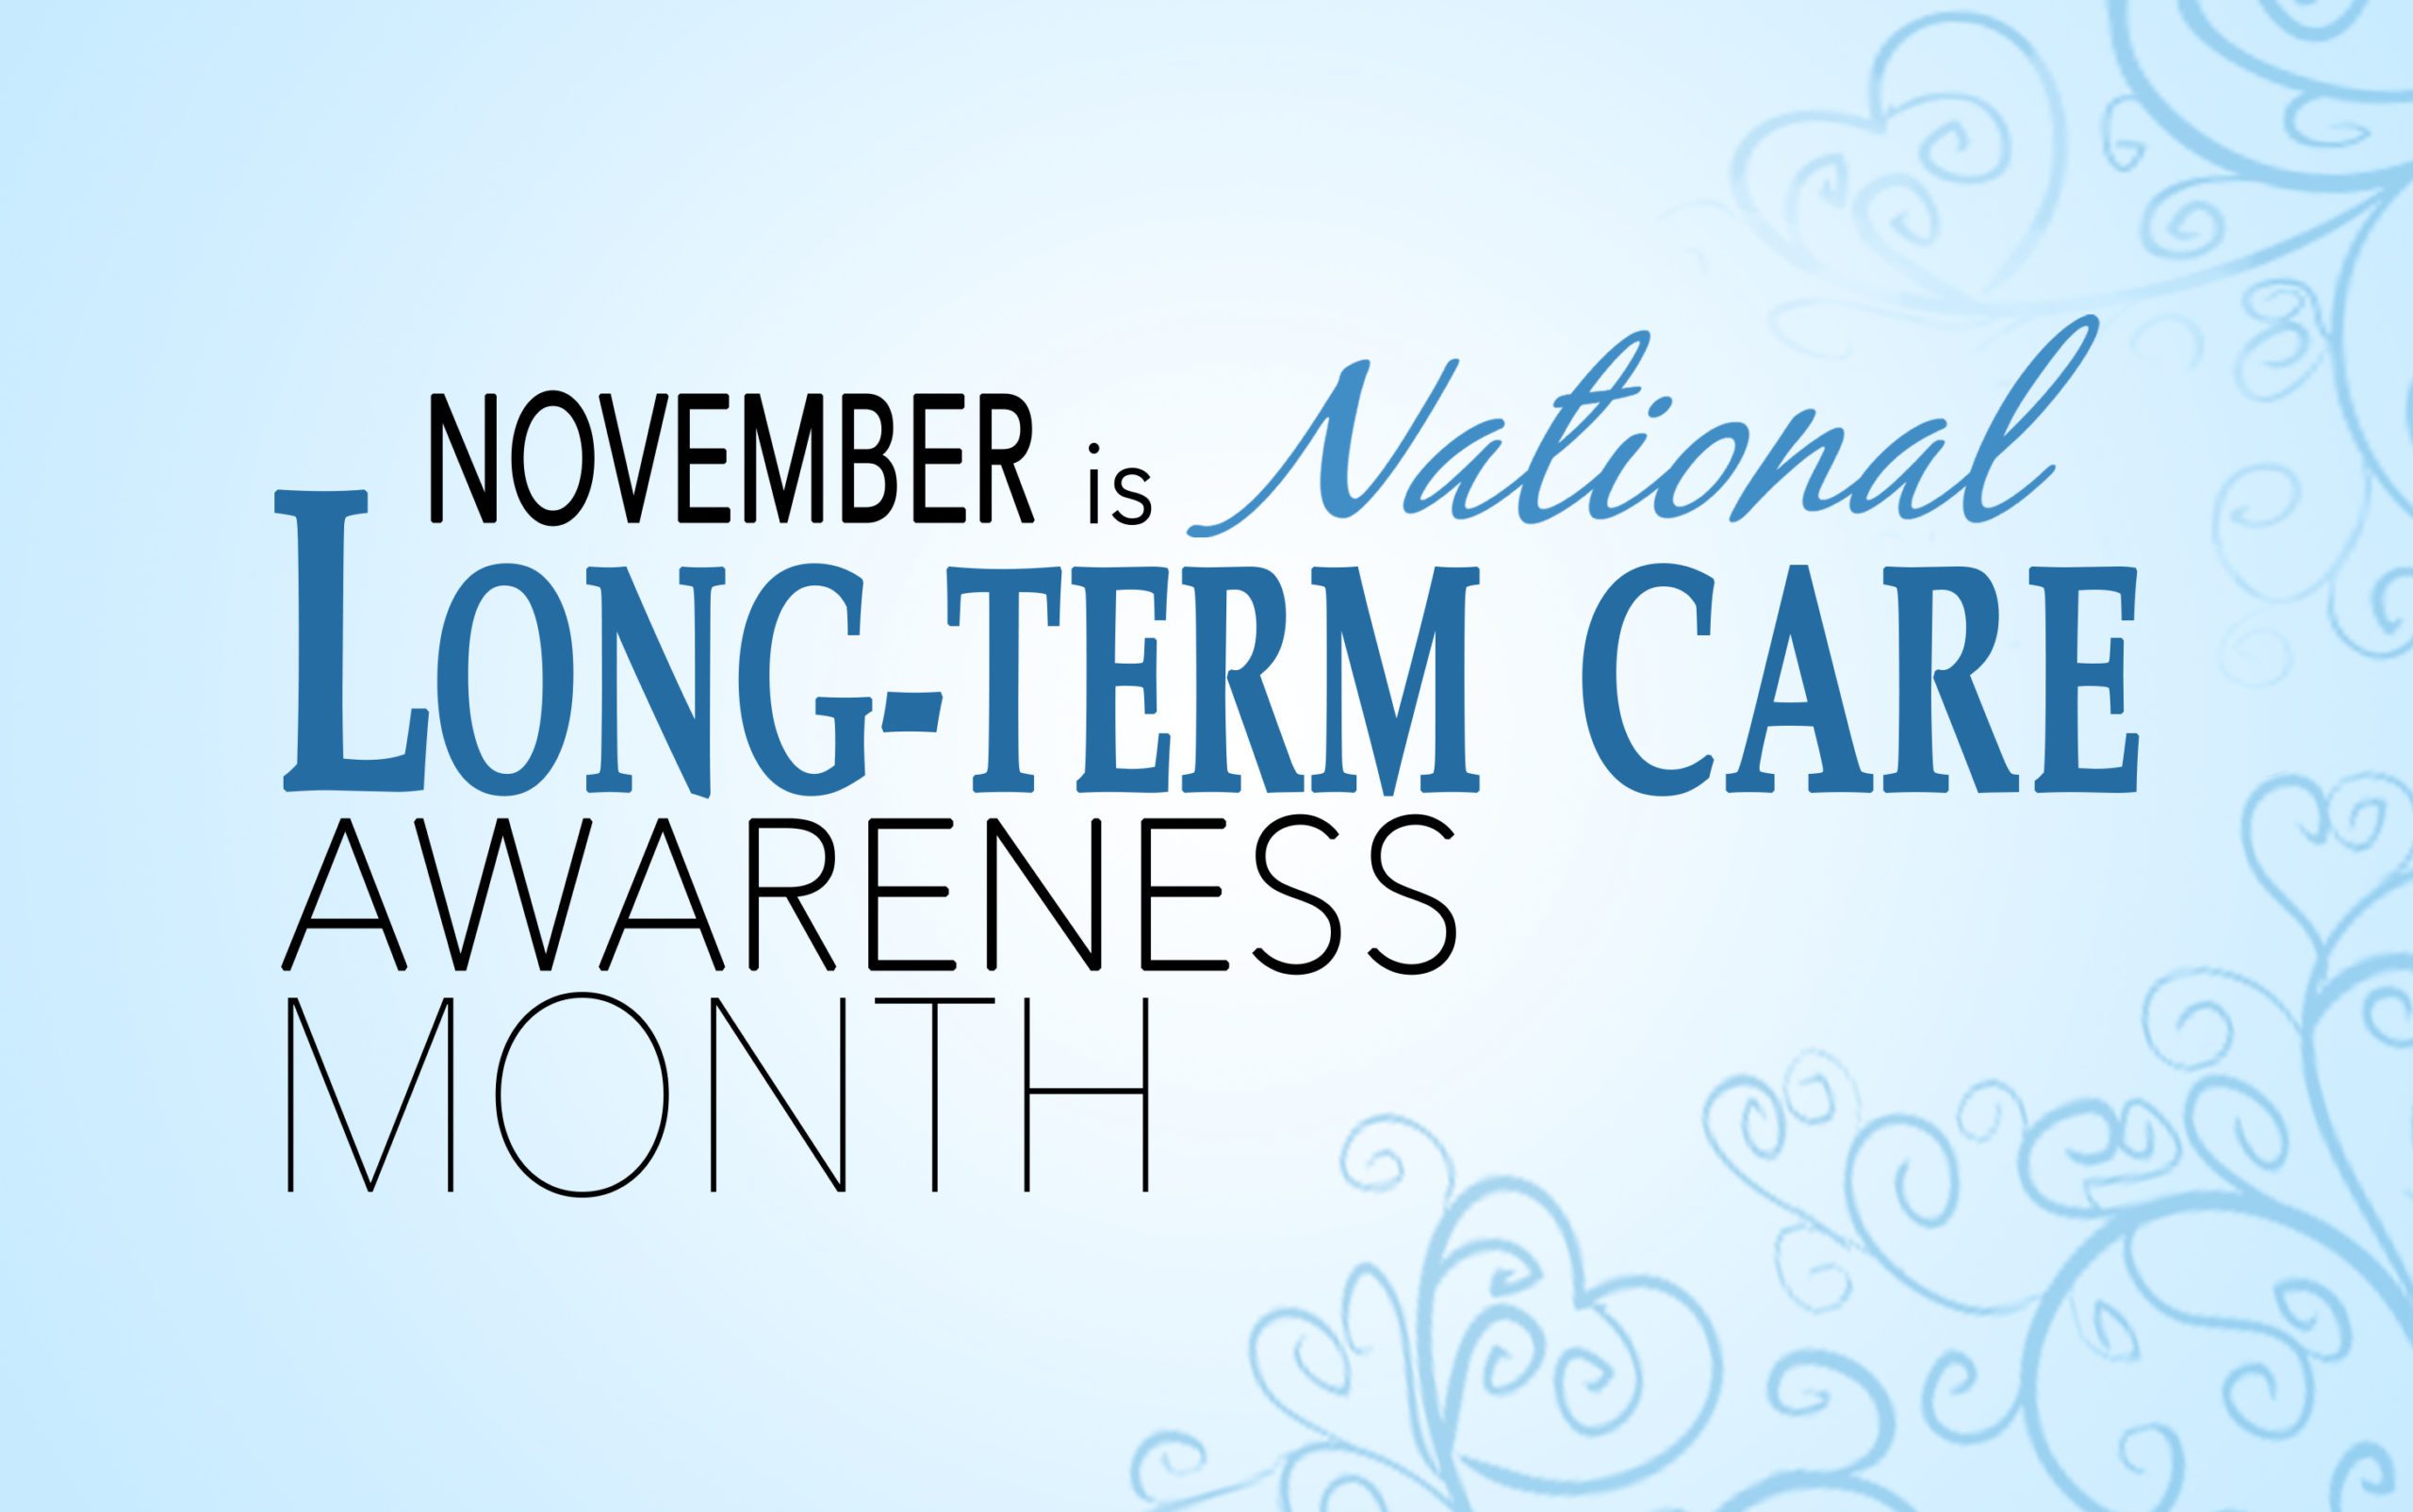 November is national long-term care awareness month